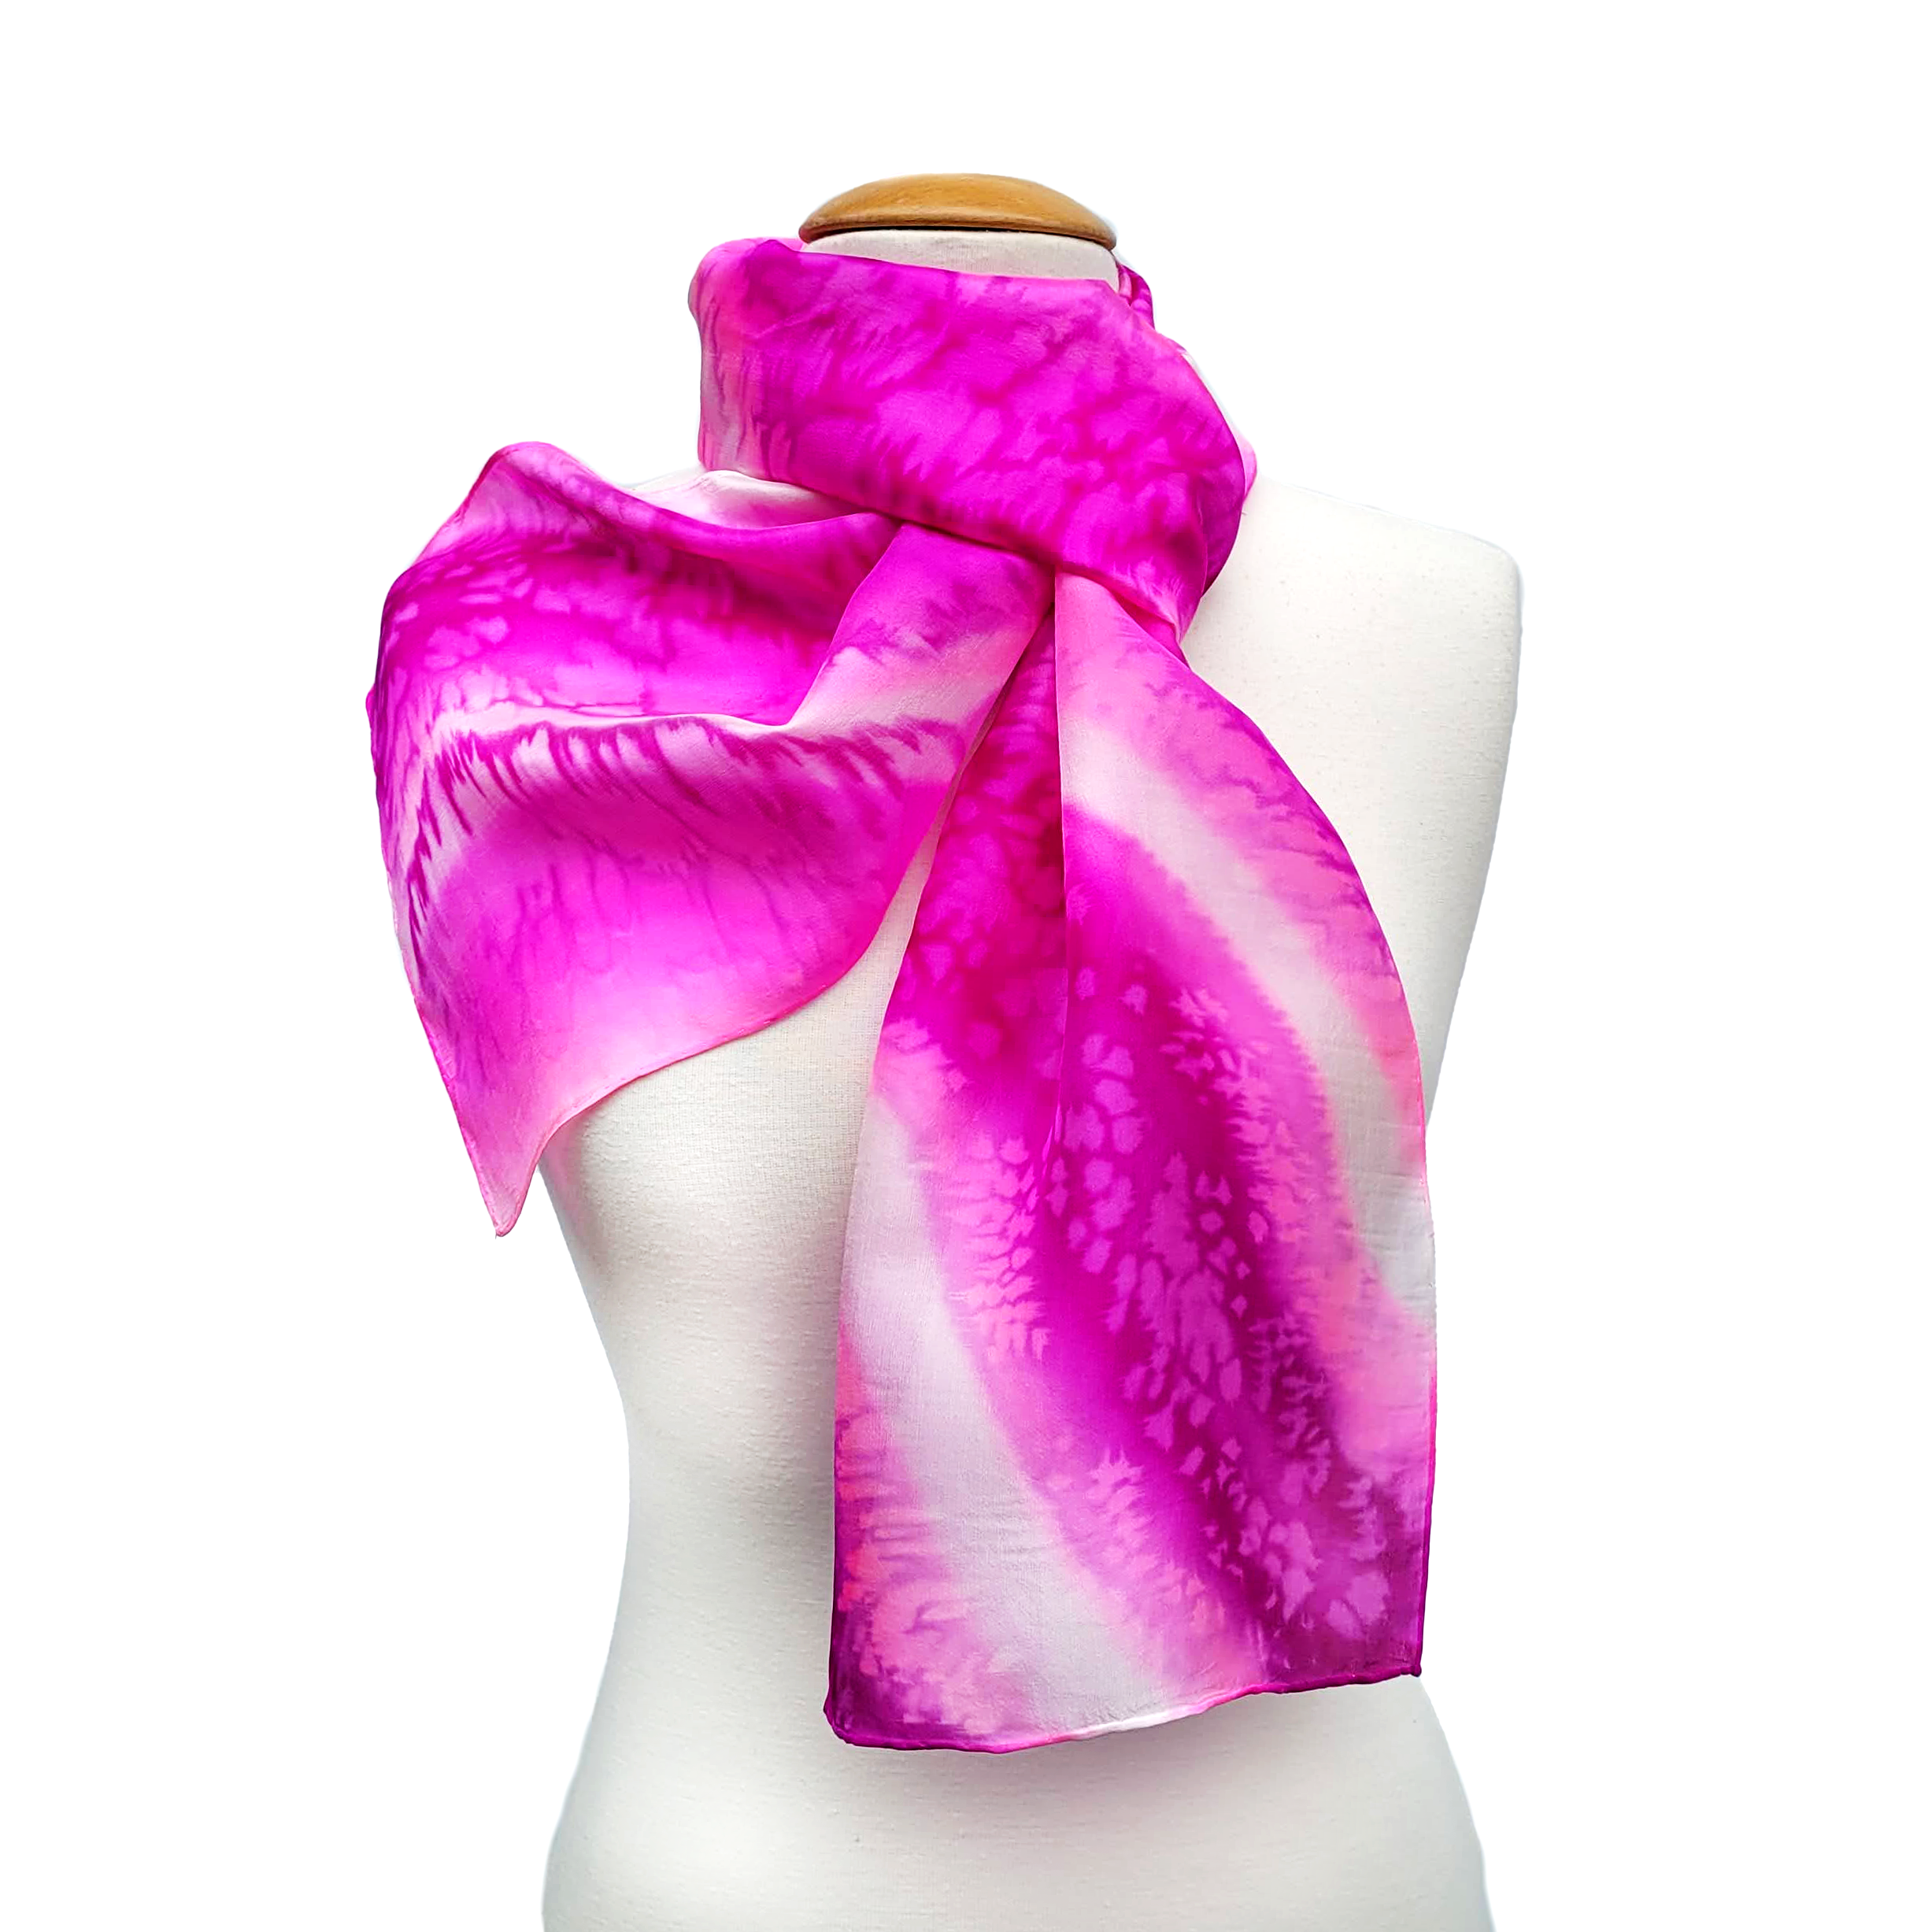 silk scarf pink and white color hand painted tie dyed long scarf handmade by Lynne Kiel